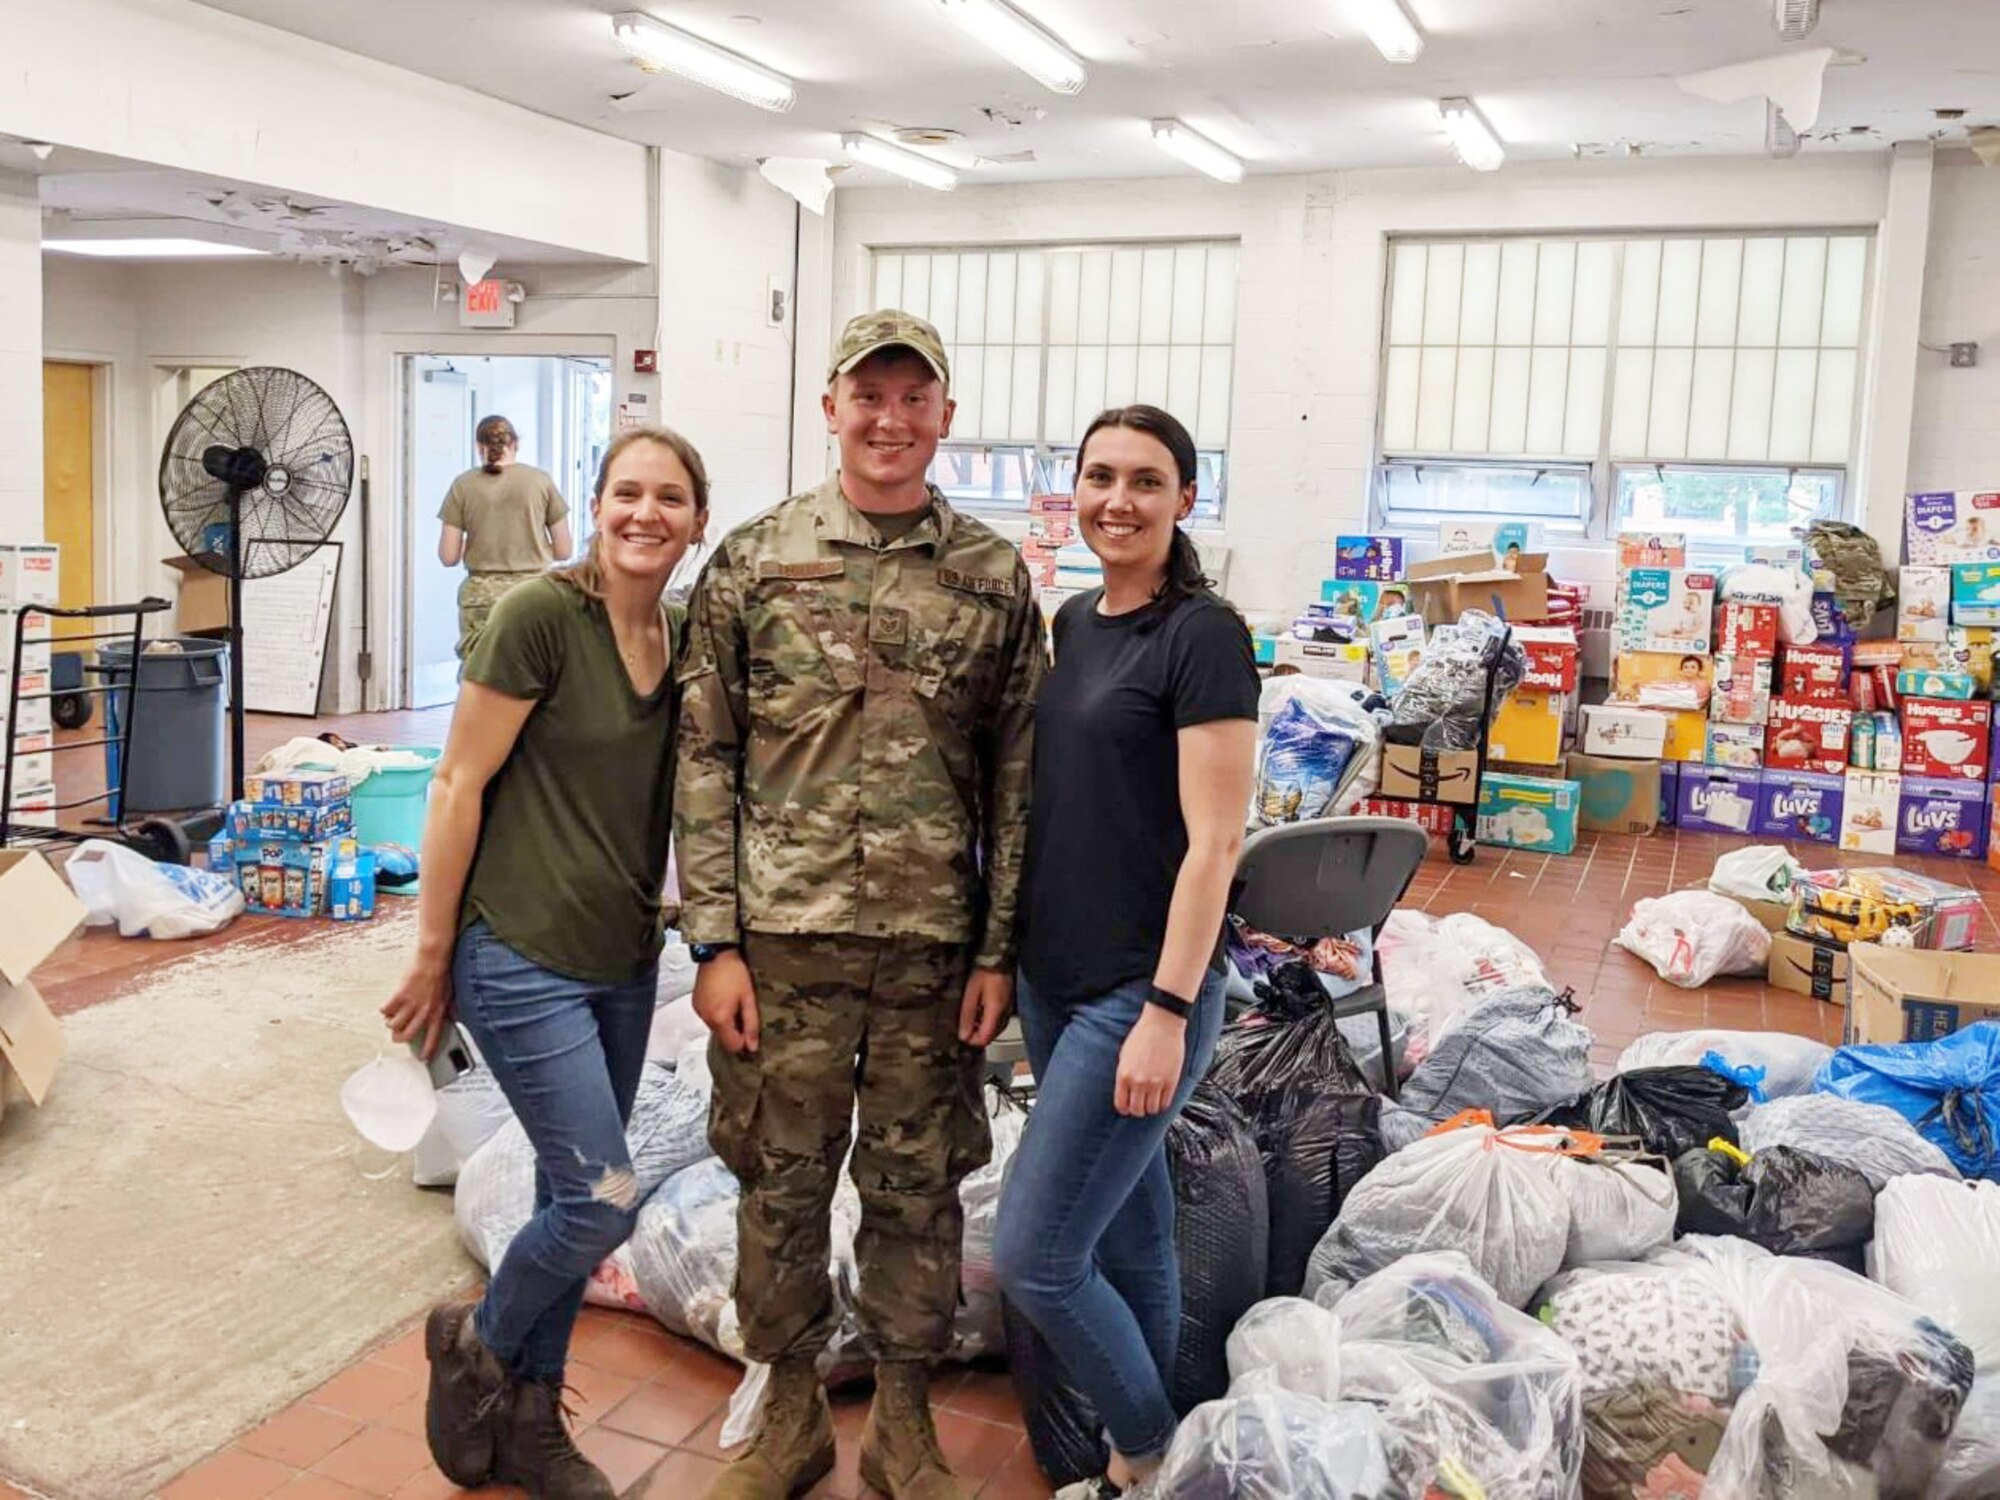 From left to right: Senior Airman Katlyn Legerstee, Staff Sgt. Jake Leonard, and Tech. Sgt. Cassandra Dowling, of the 157th Air Refueling Wing, inside the donation center at Joint Base McGuire-Dix-Lakehurst, Sept. 17, 2021.